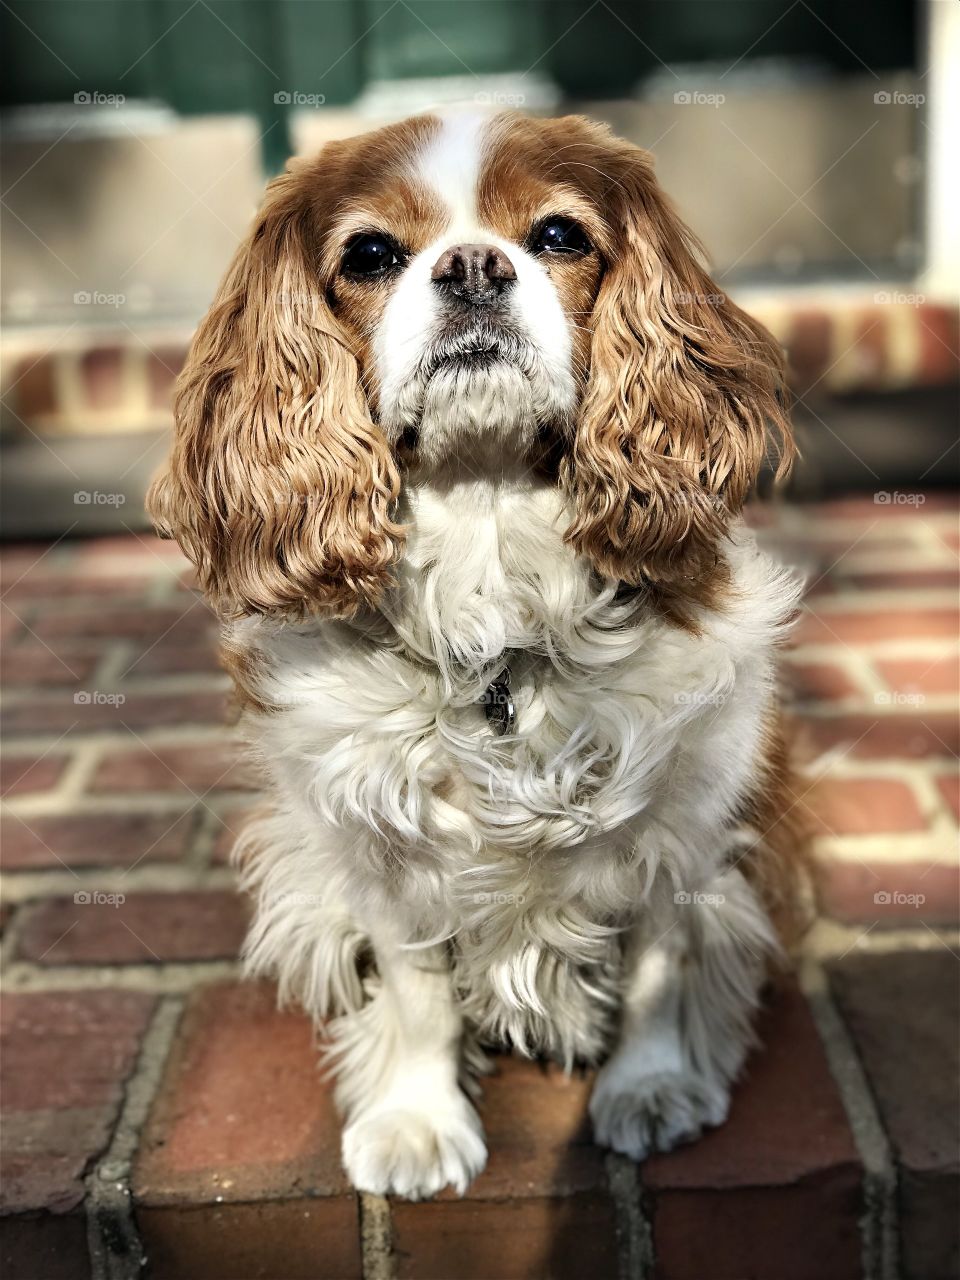 Cavalier King Charles Spaniel sniffs the morning air on the front porch